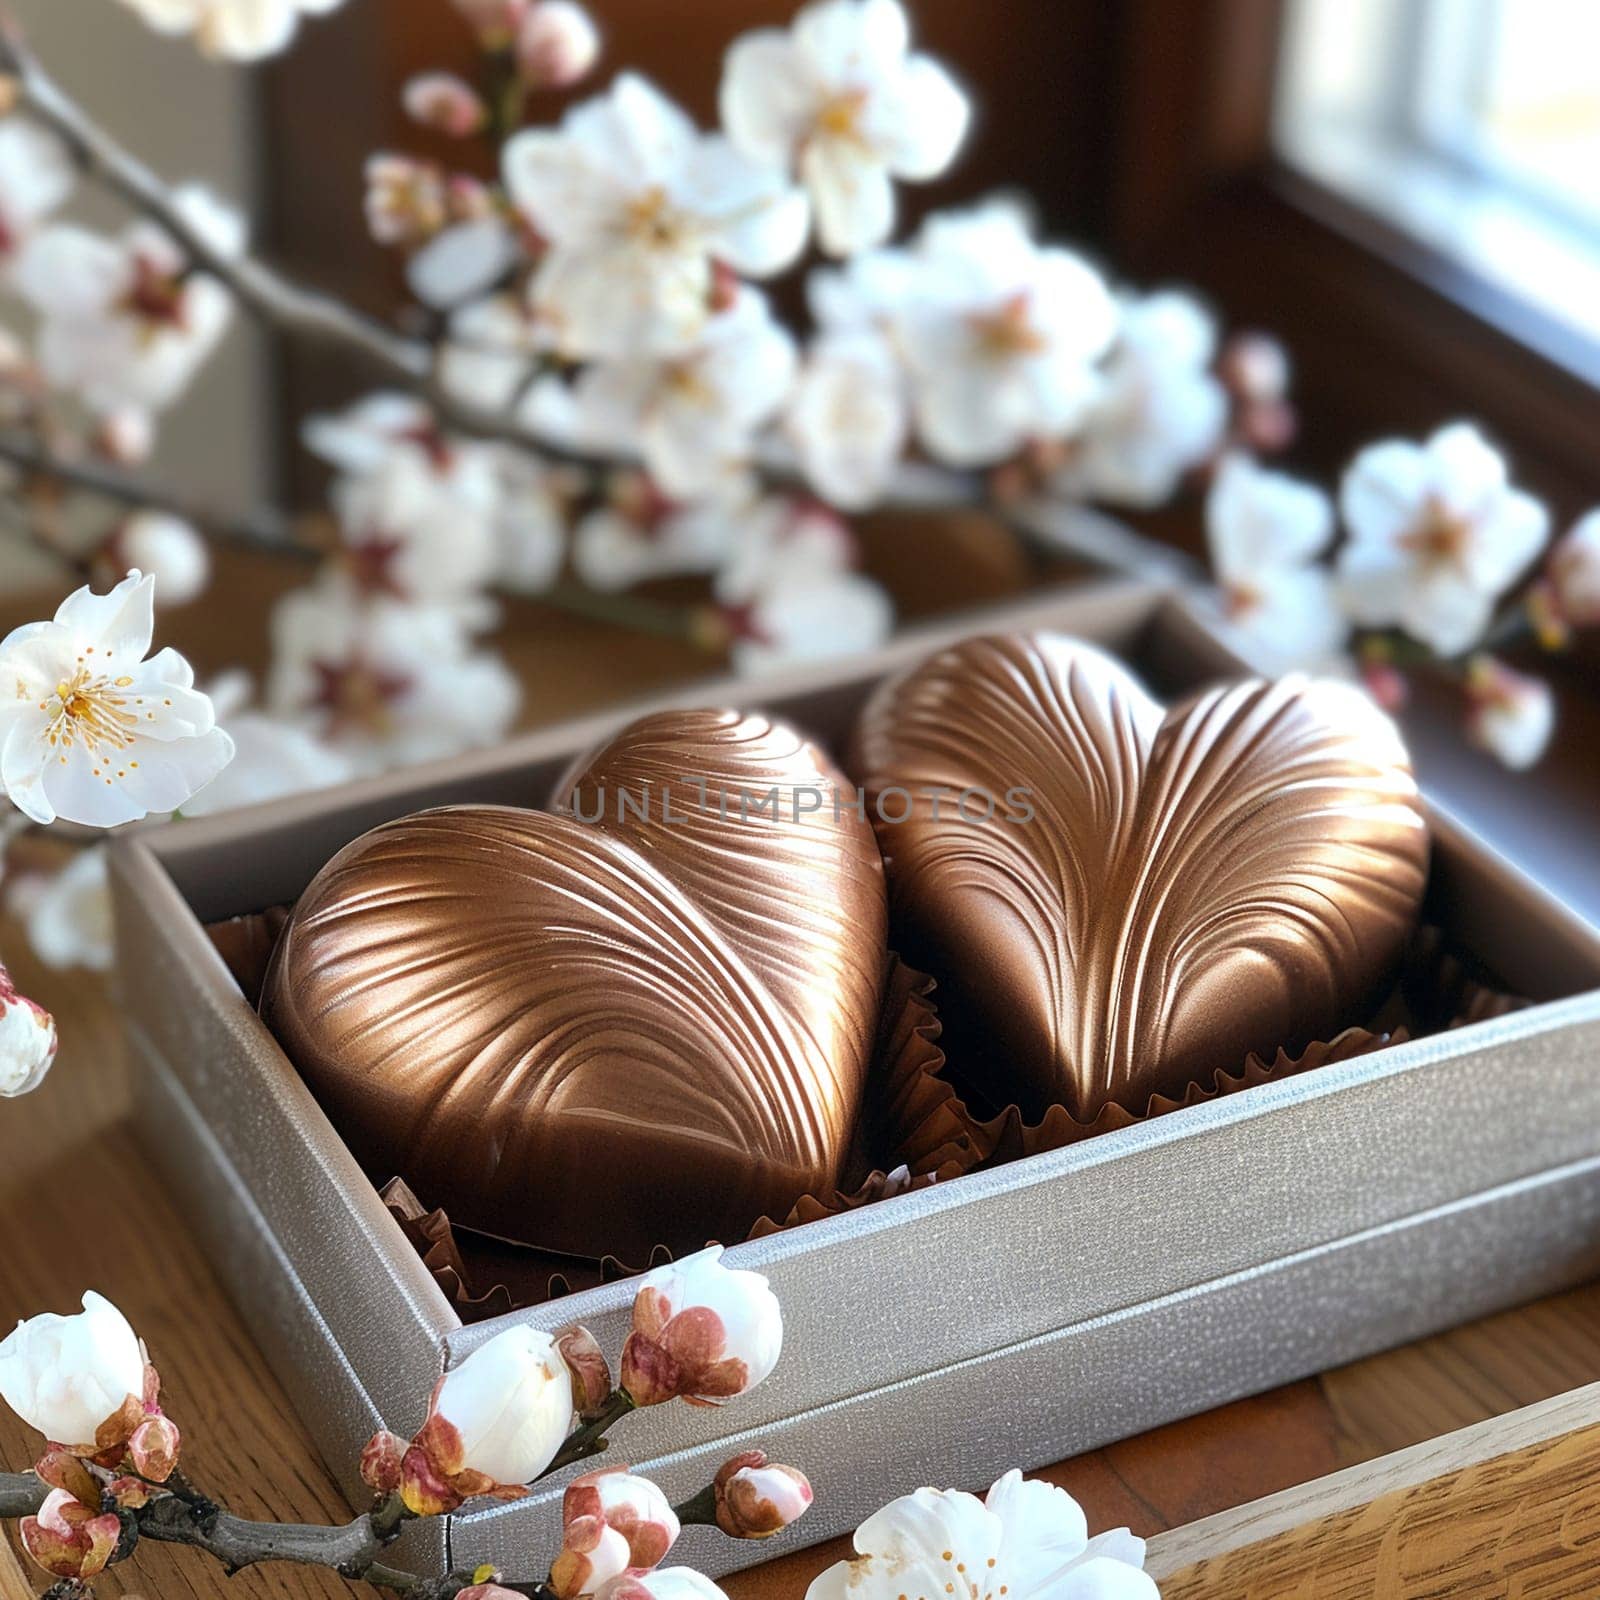 Pair of chocolate hearts nestled in silver box, set against backdrop of cherry blossoms for White Day.